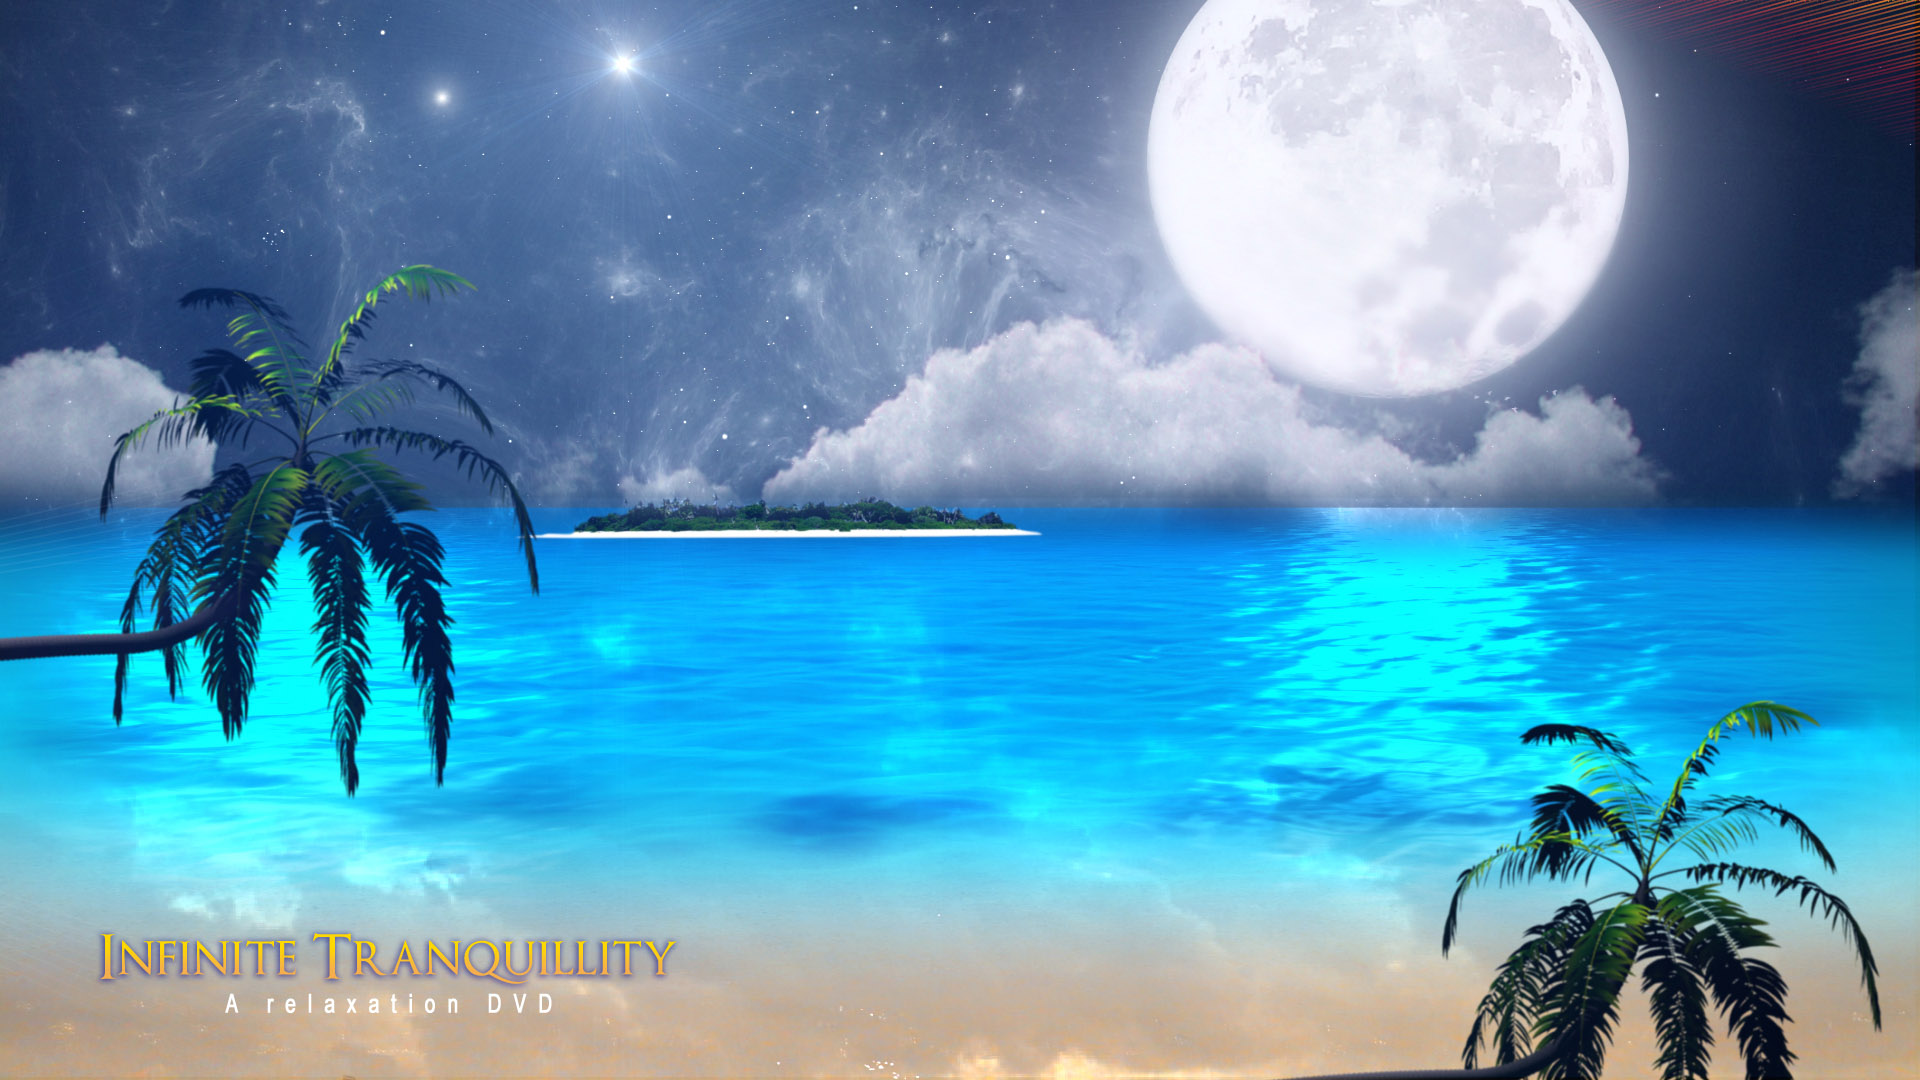 Free download Infinite Tranquility Download relaxation wallpapers ...